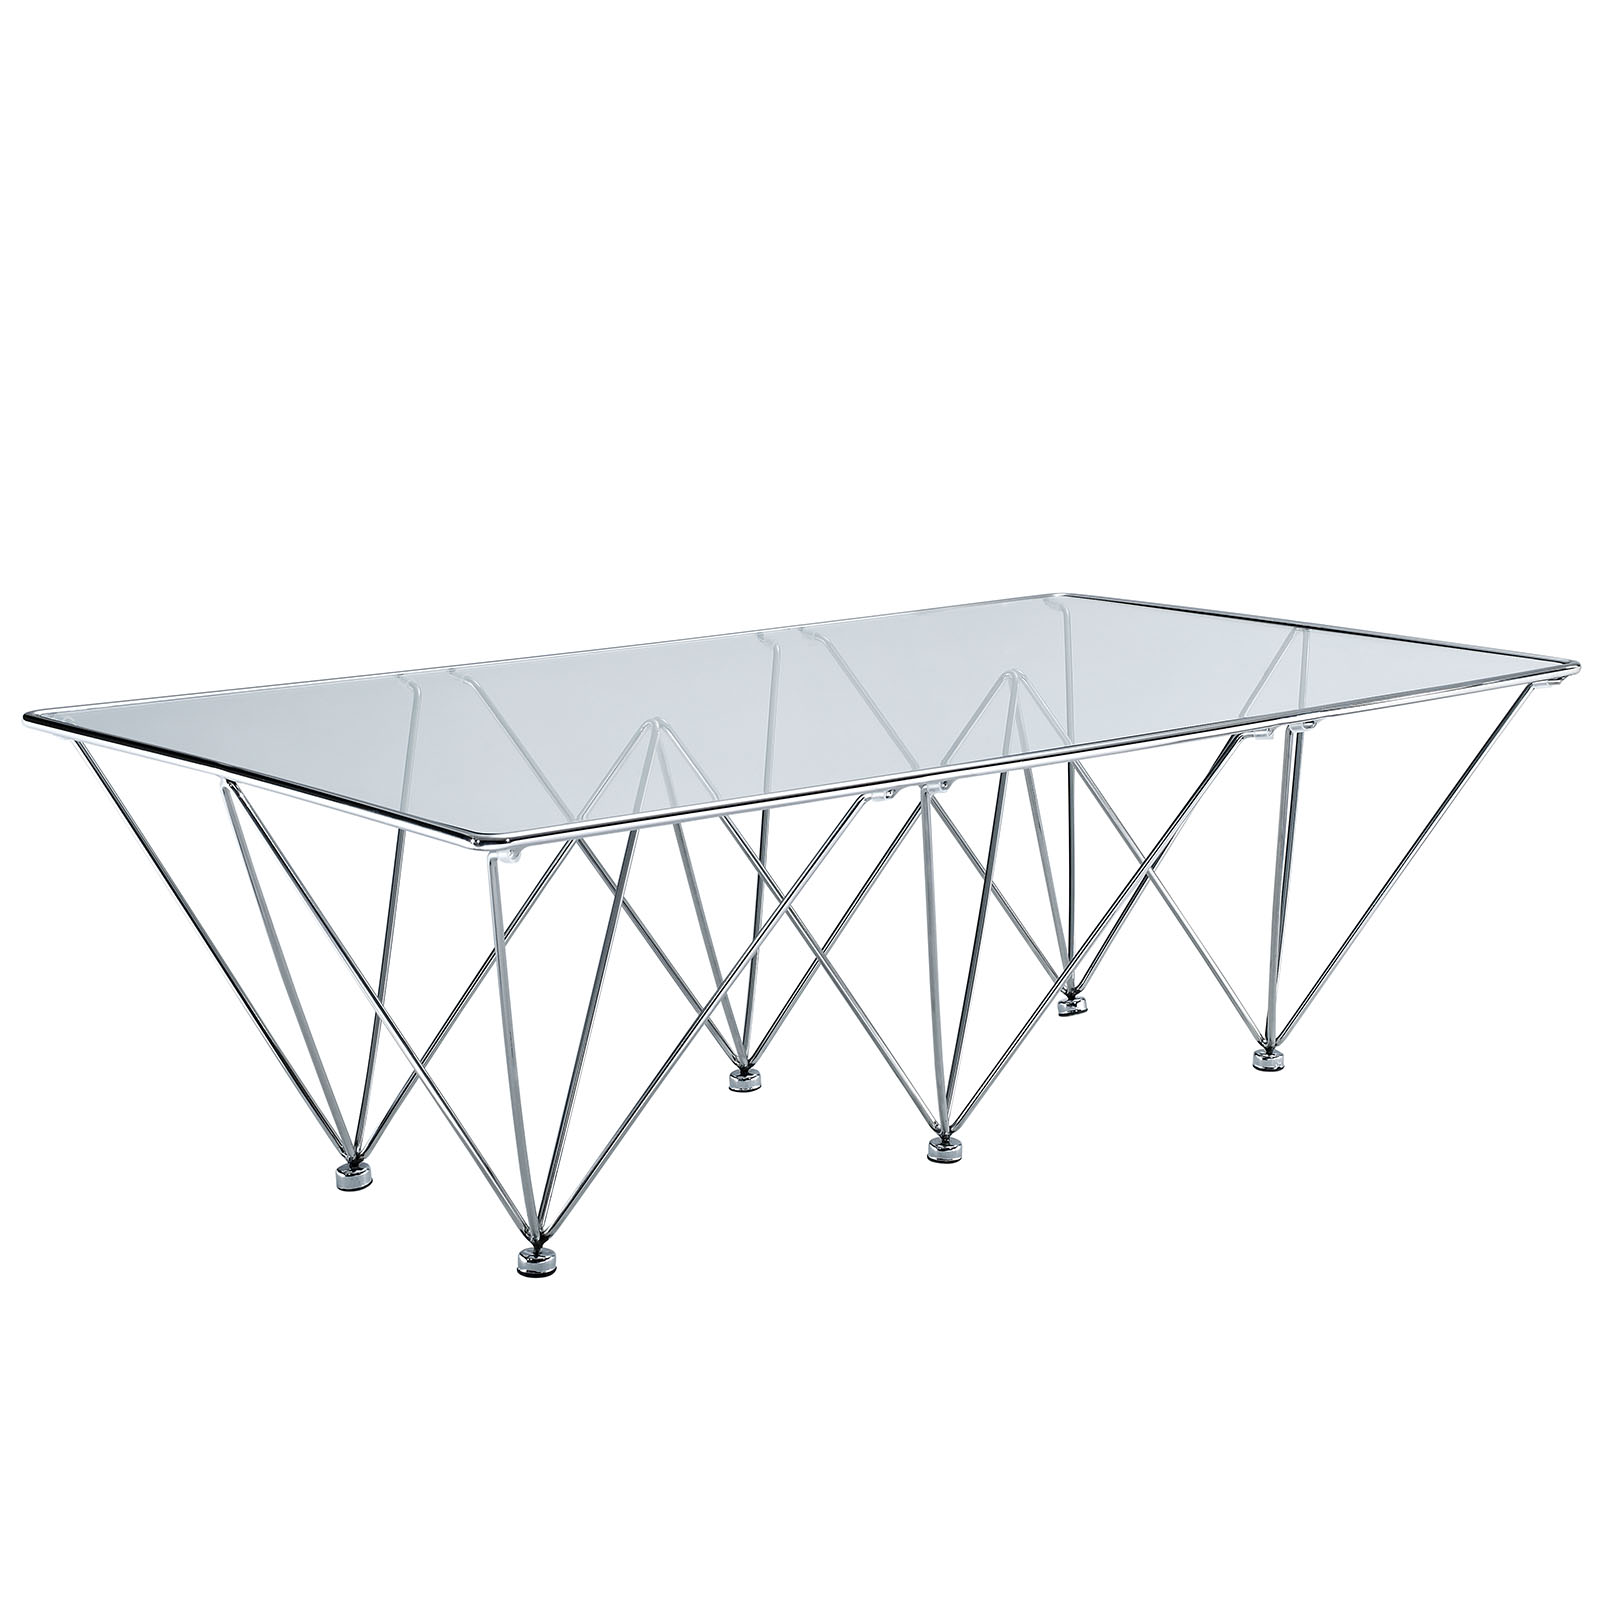 Prism Coffee Table Rentals | Event Furniture Rental